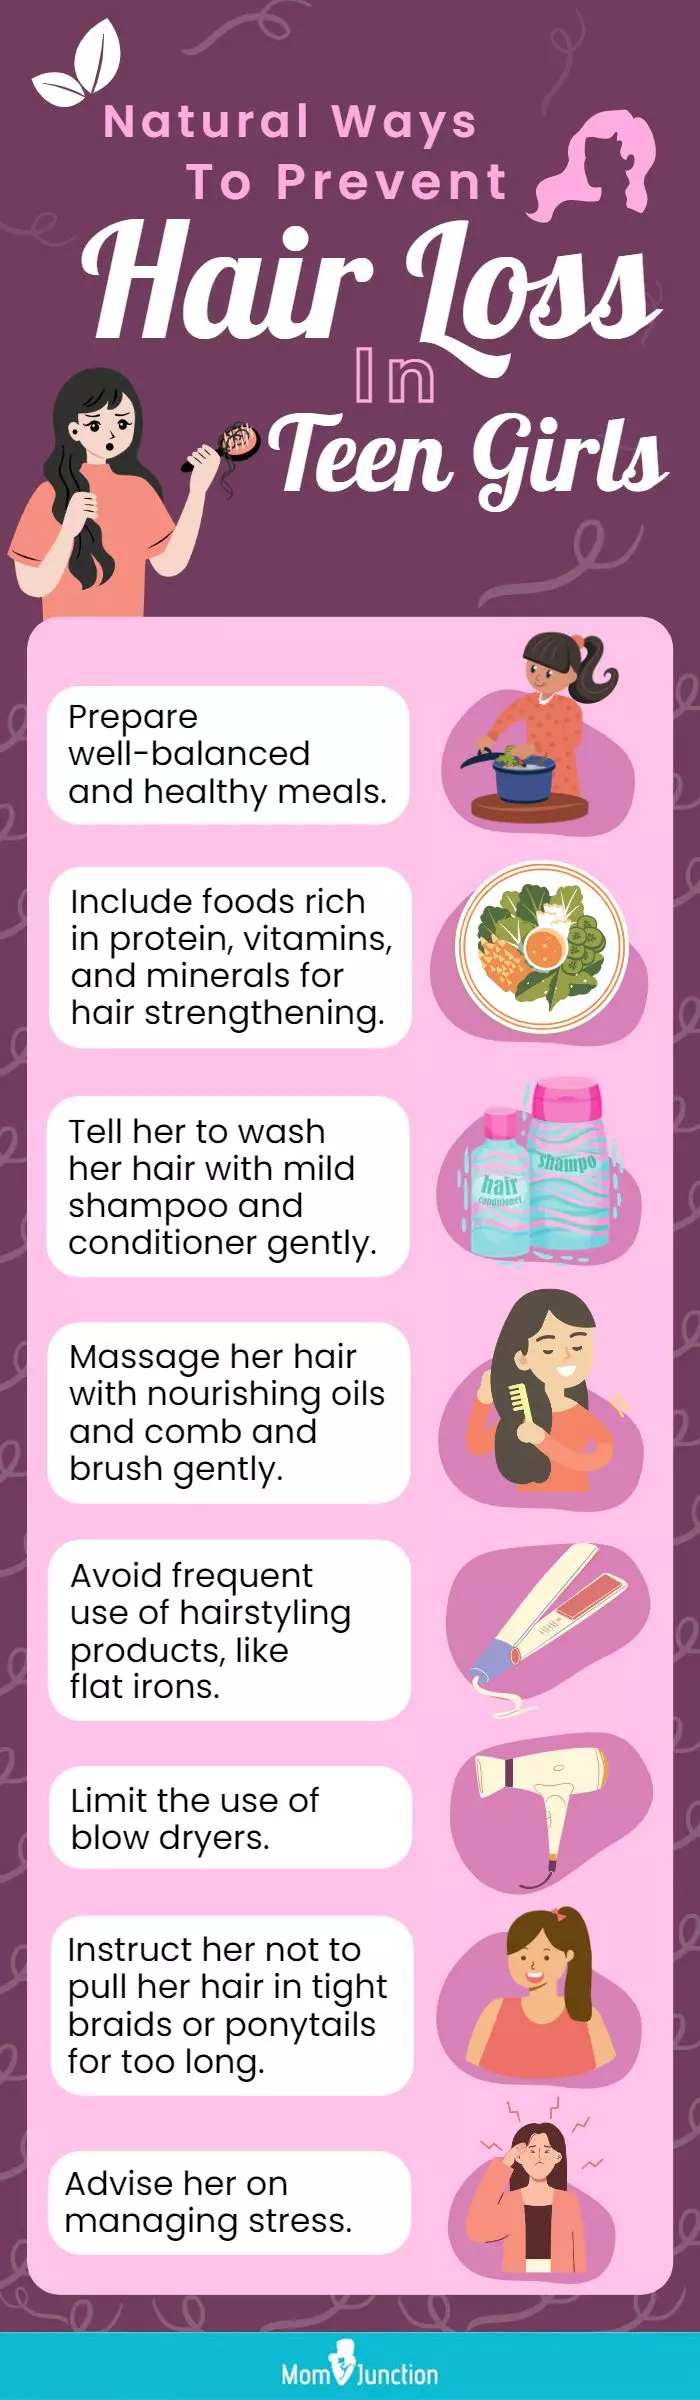 natural ways to prevent hair loss in teen girls (infographic)